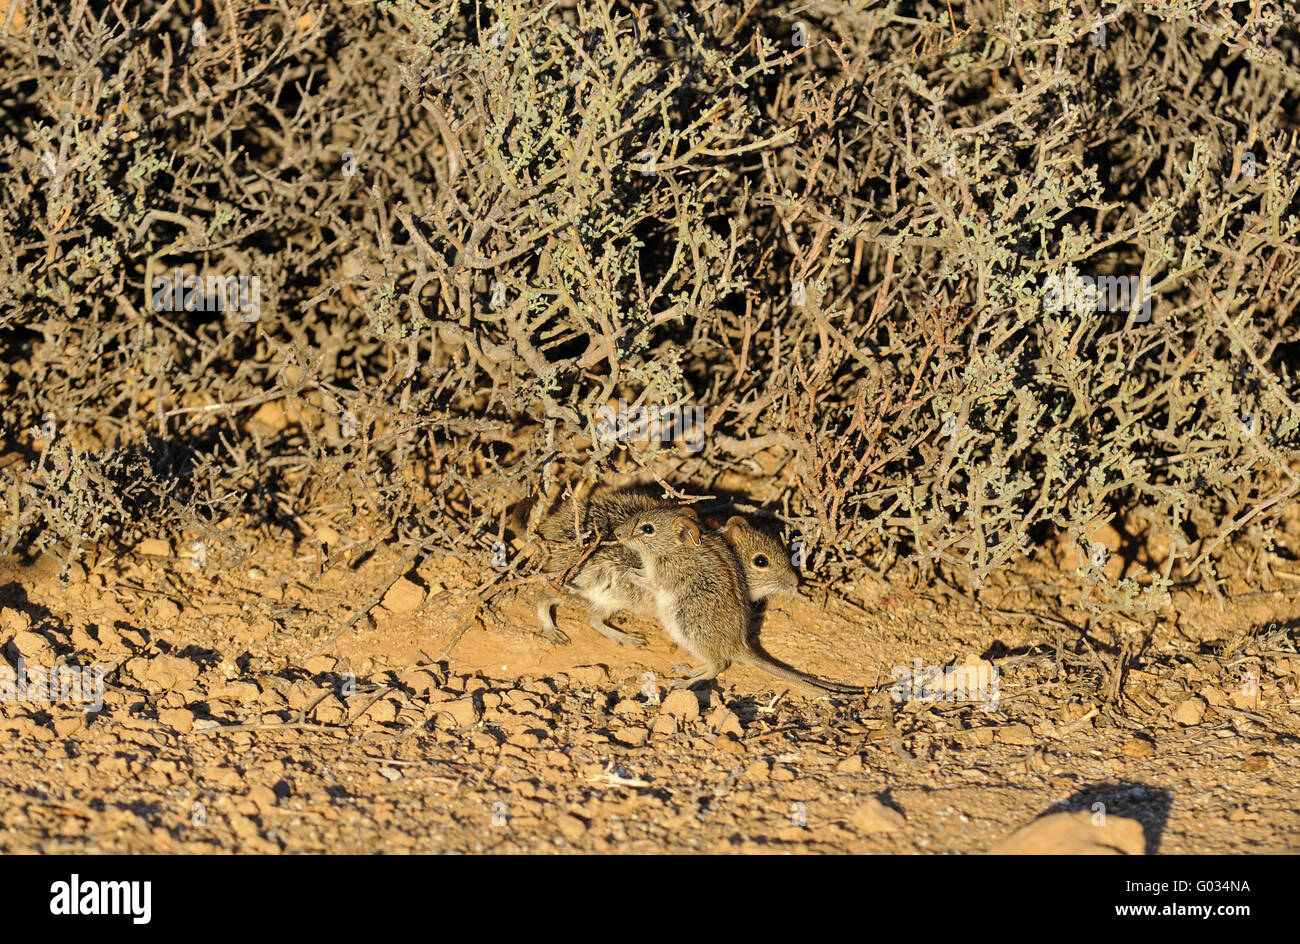 Adult and juvenile of four-striped grass mouse Stock Photo